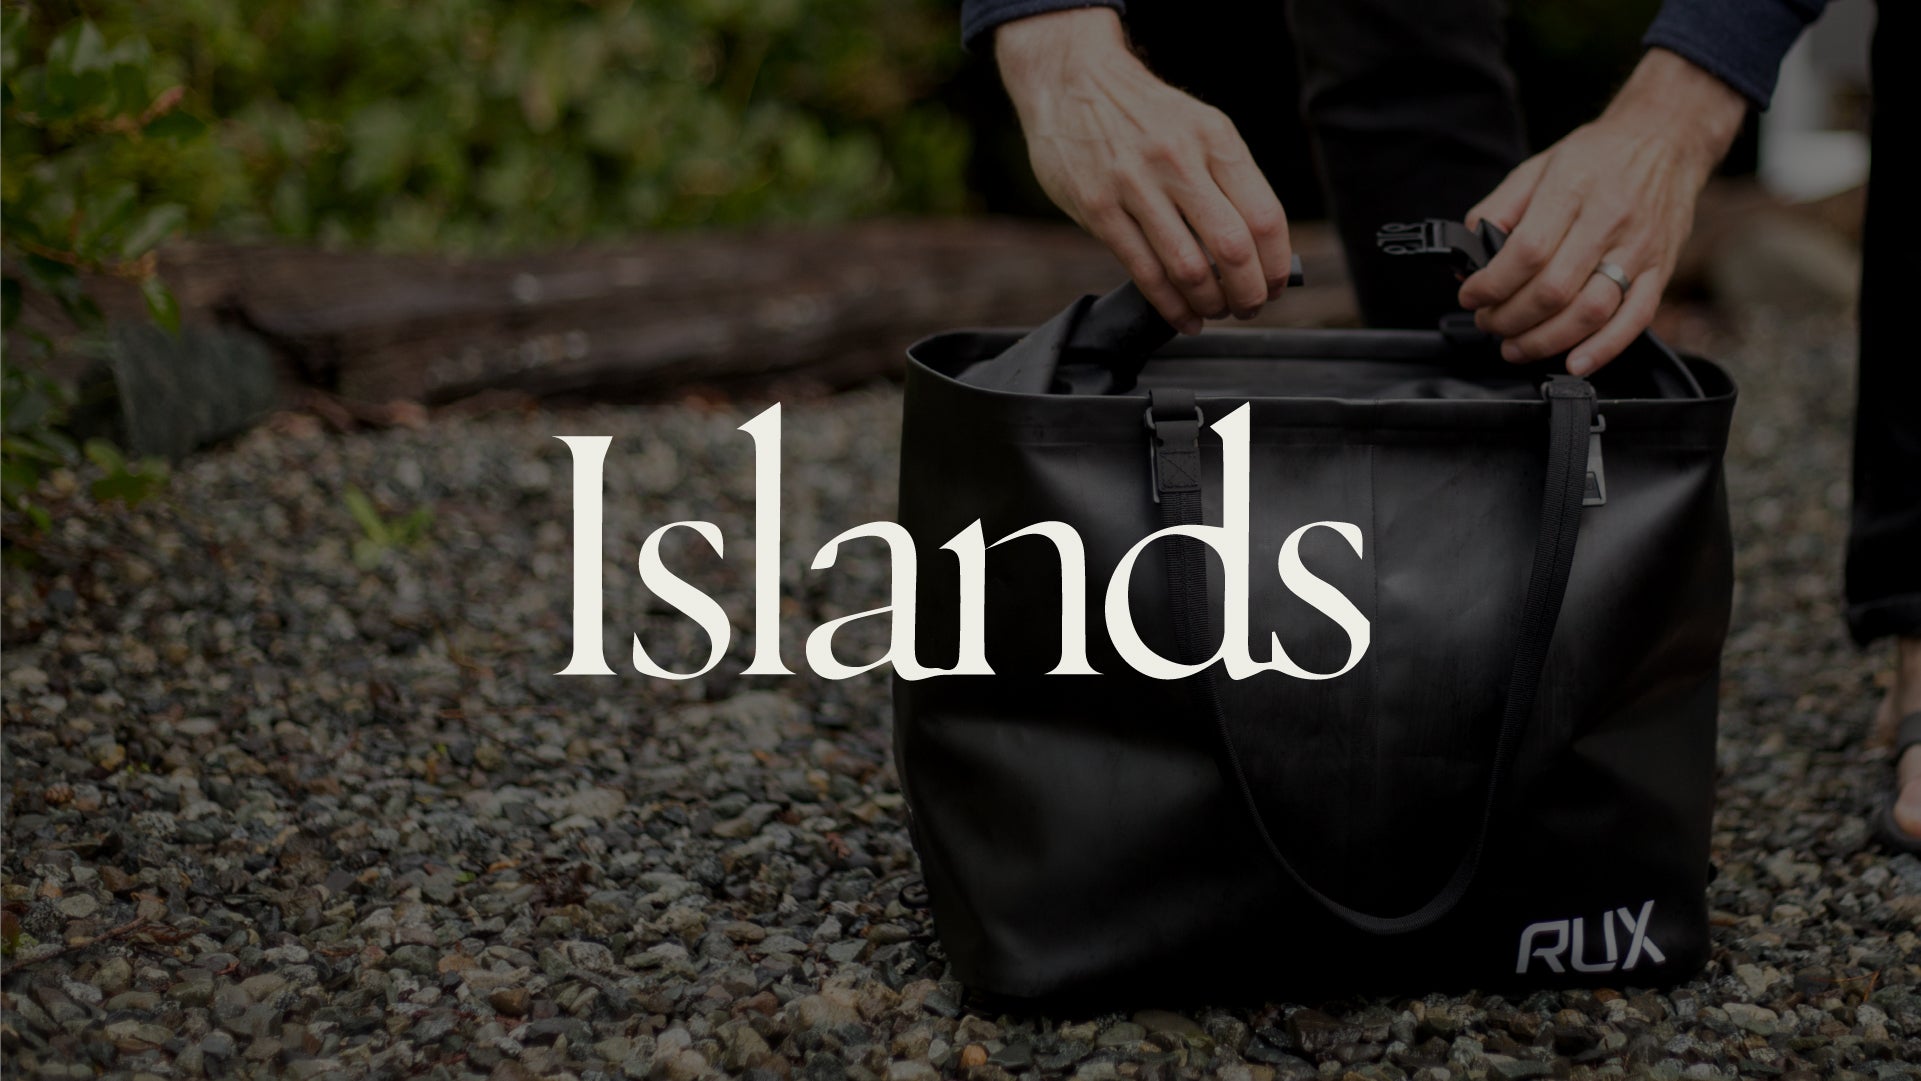 The RUX Waterproof Bag is Featured in Islands "12 Holiday Gift Ideas for the Outdoors Enthusiast in Your Life"